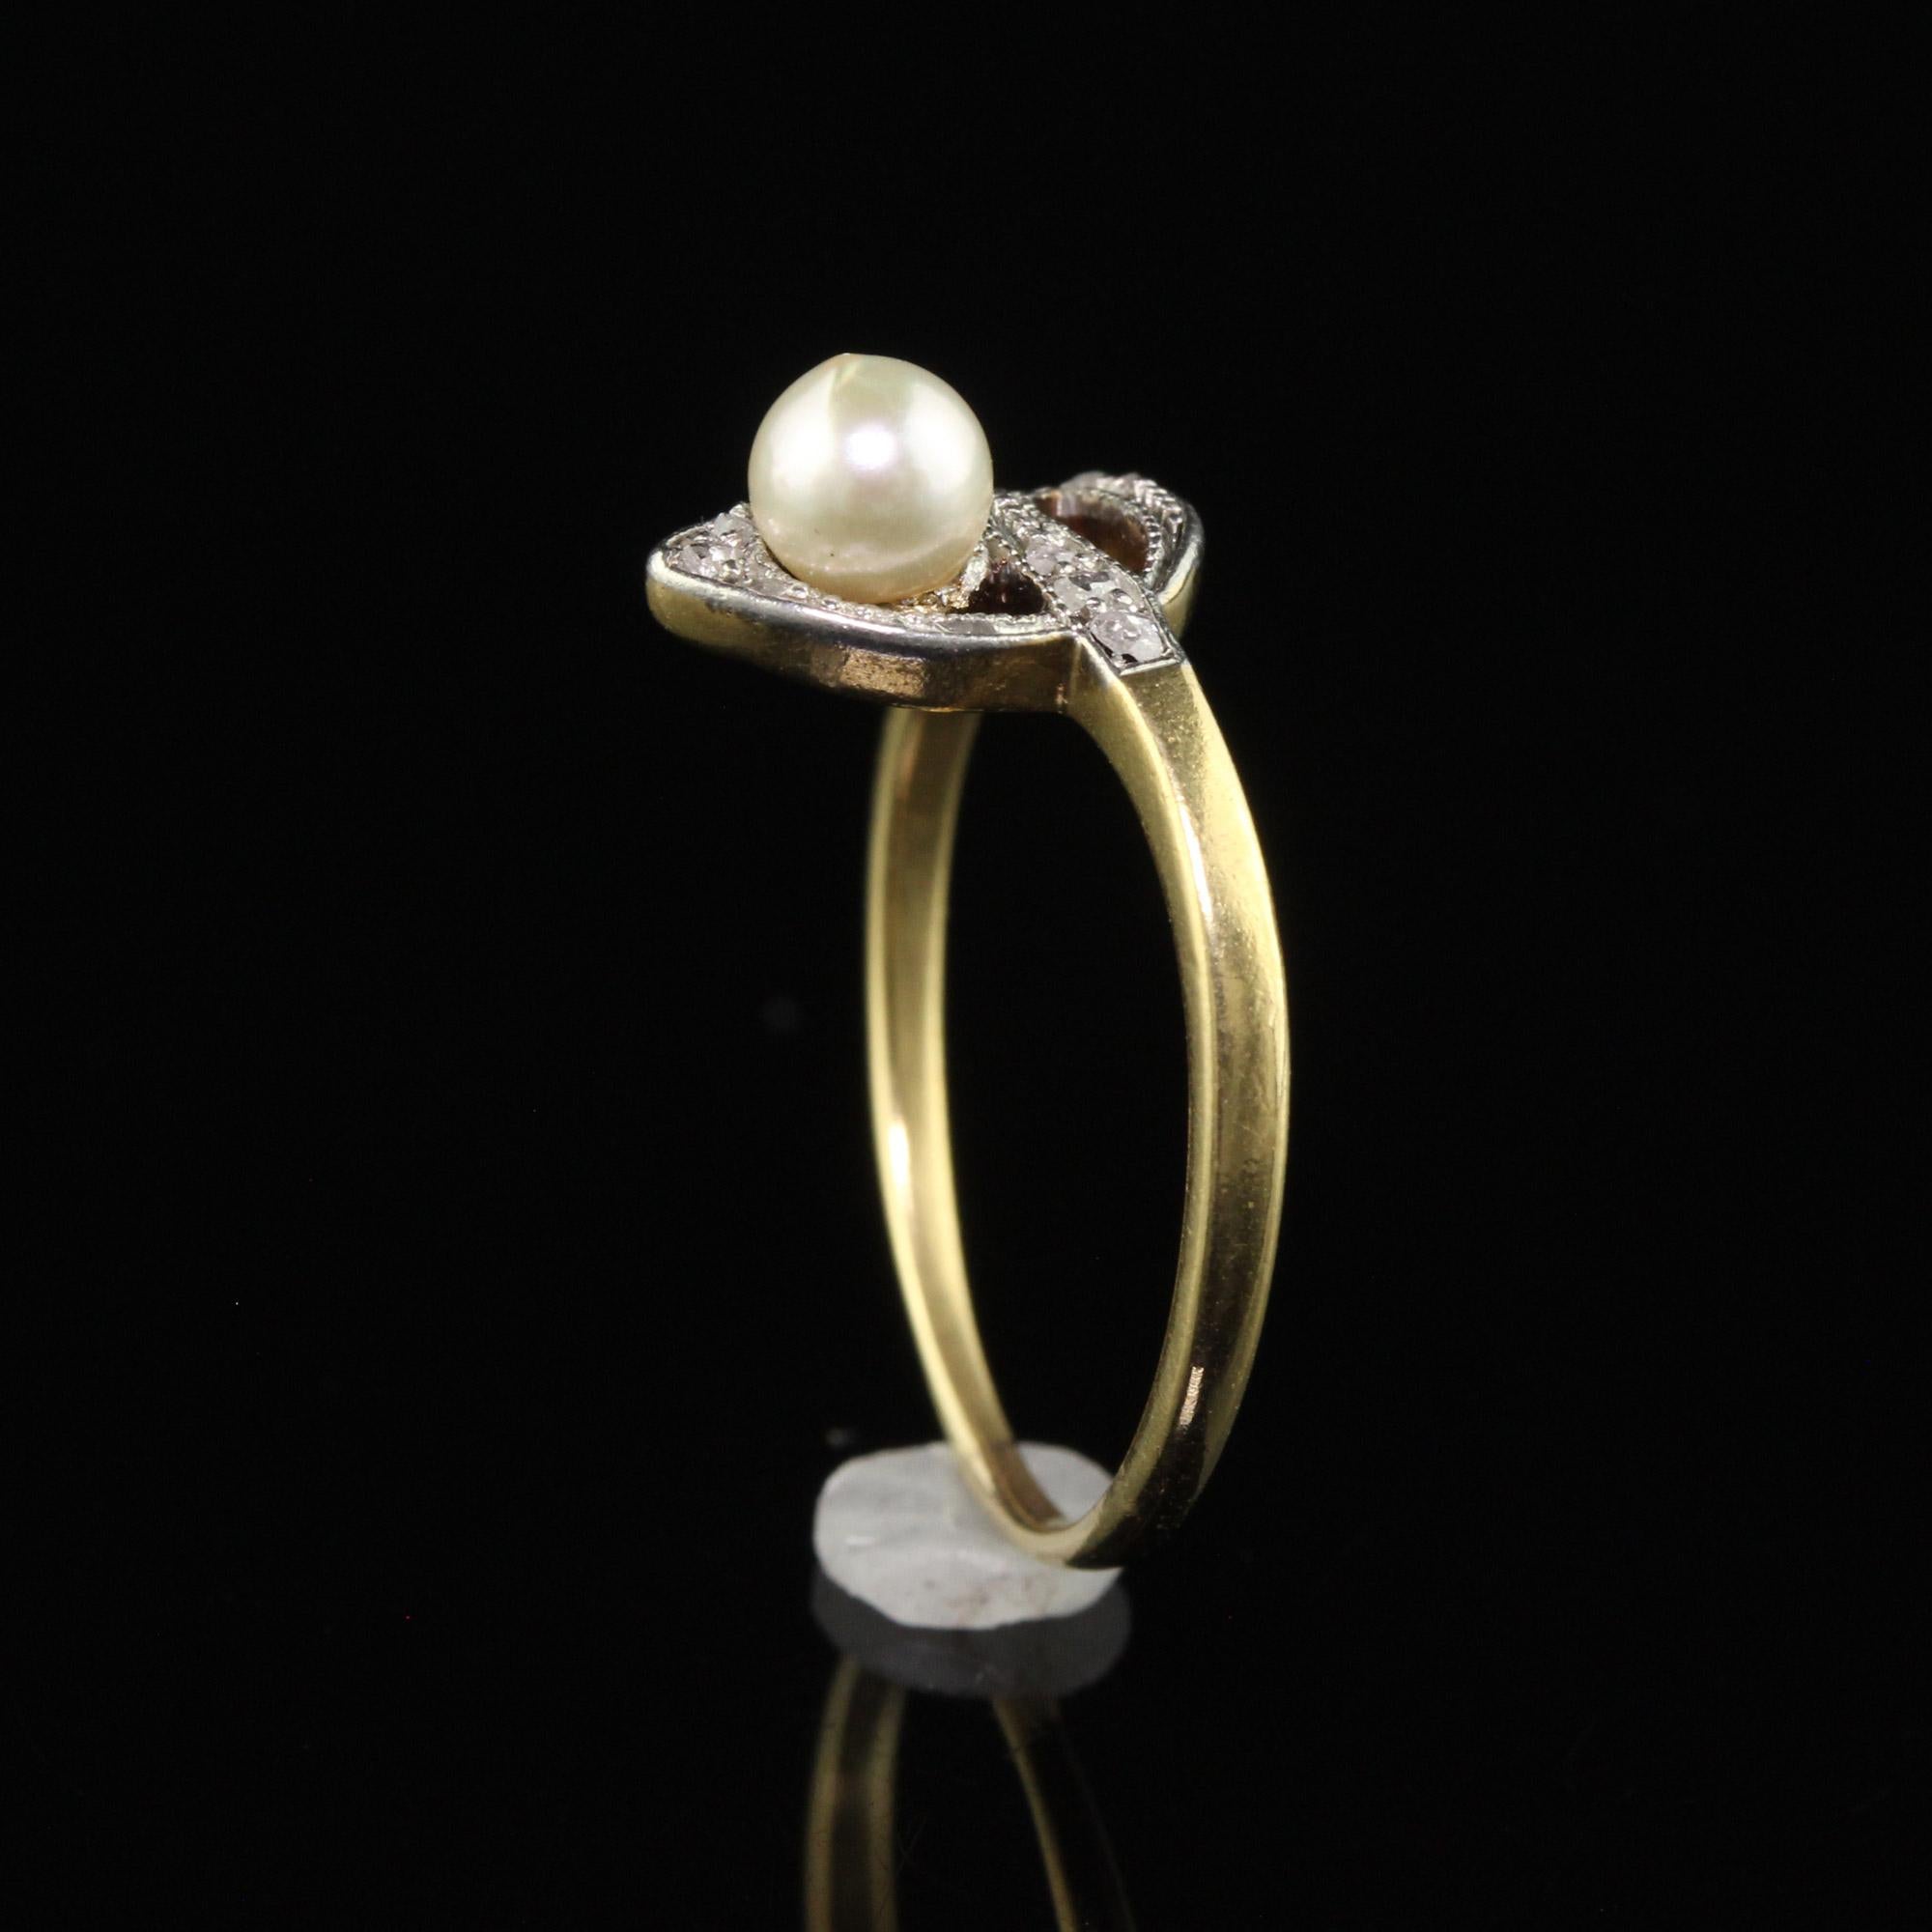 Antique Art Deco 18K Yellow Gold Rose Cut Diamond and Pearl Ring 3